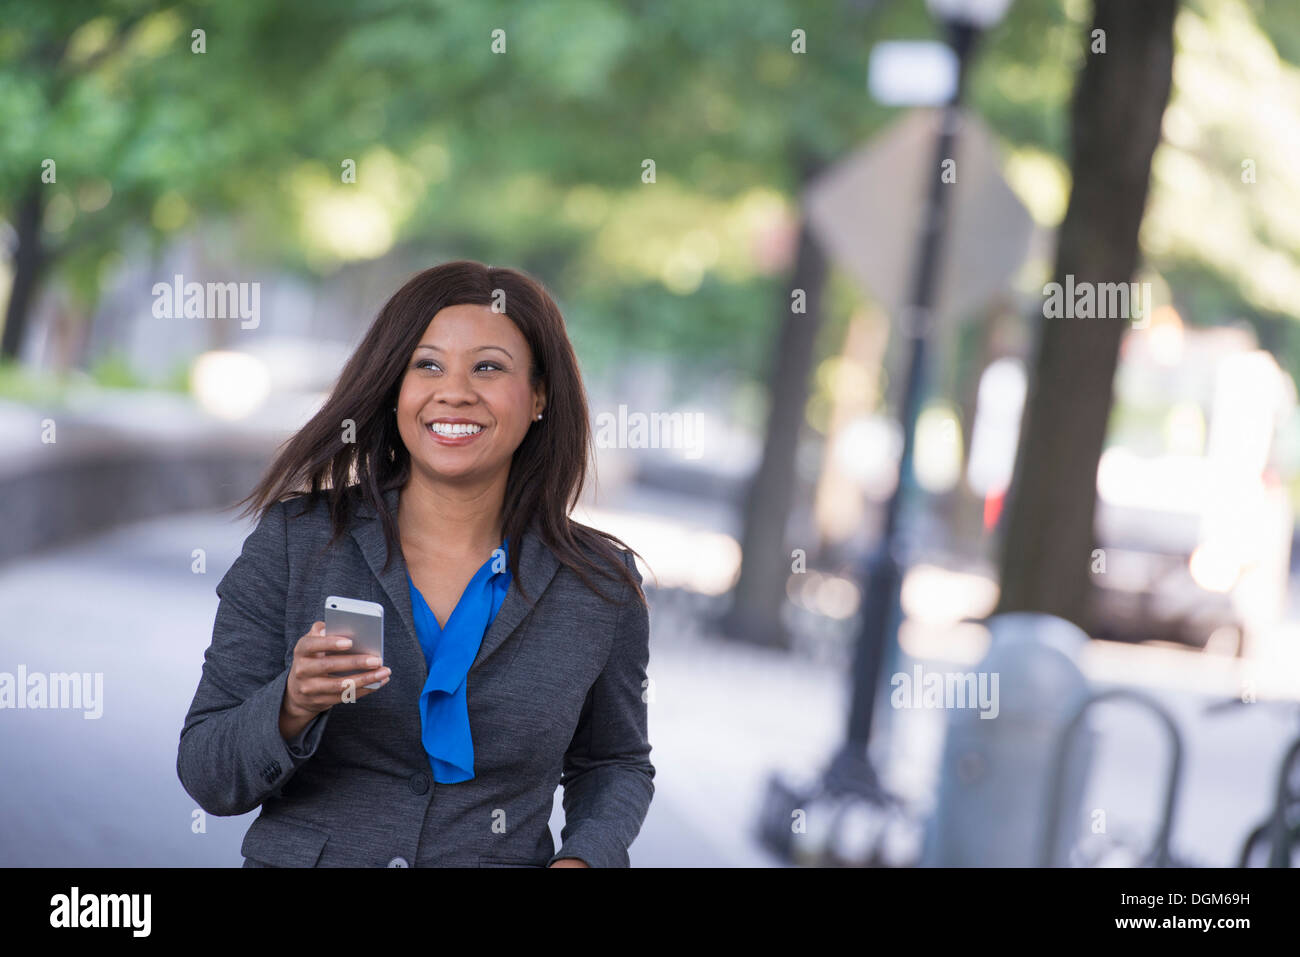 Summer. A woman in a grey suit with a bright blue shirt. Holding a smart phone. Stock Photo